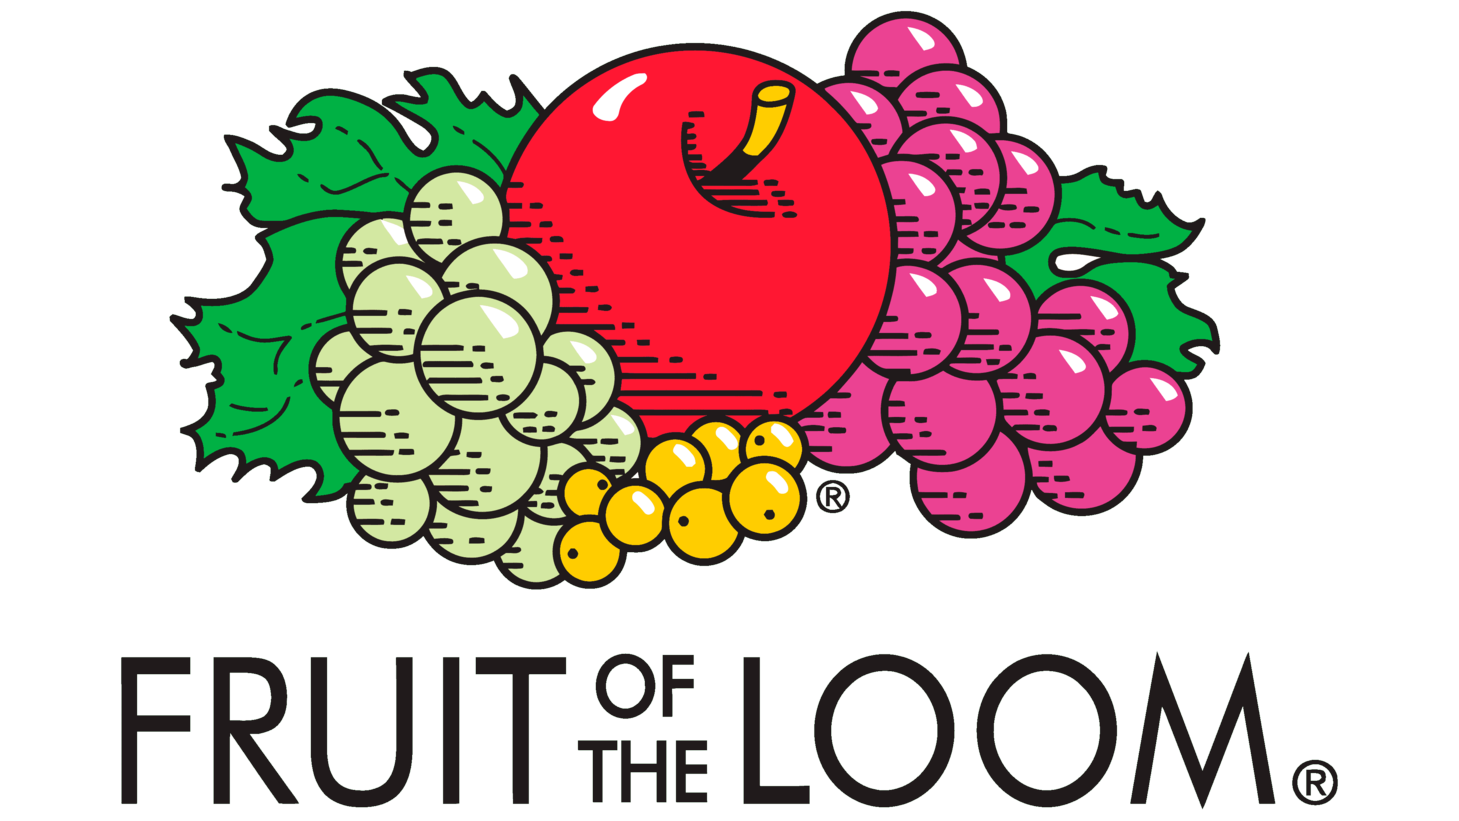 Fruit of the loom sign 2003 present